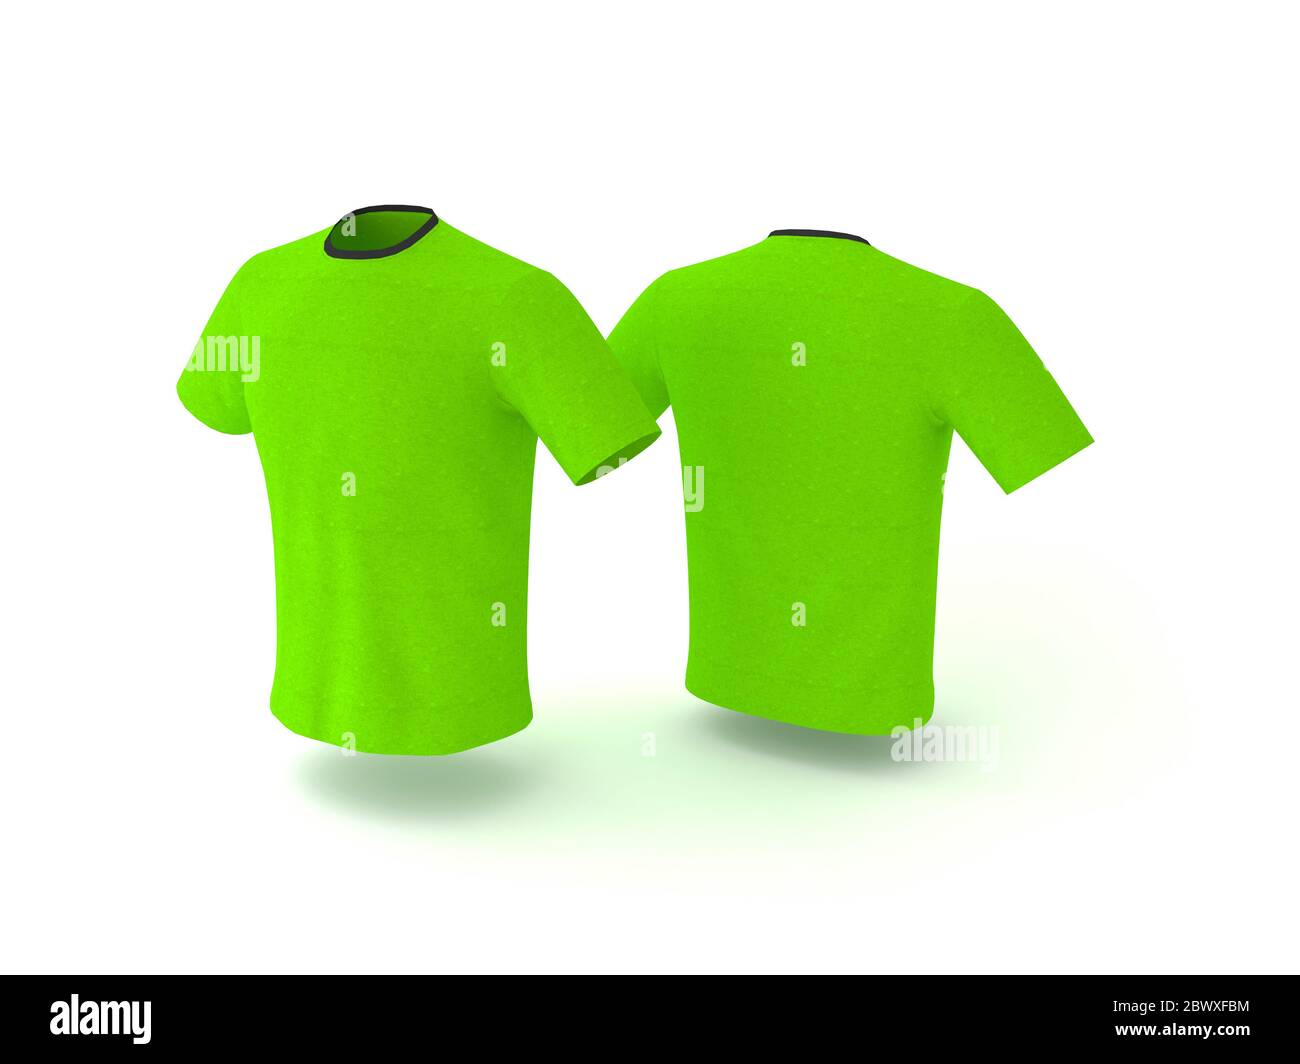 267,920 Green T Shirt Images, Stock Photos, 3D objects, & Vectors